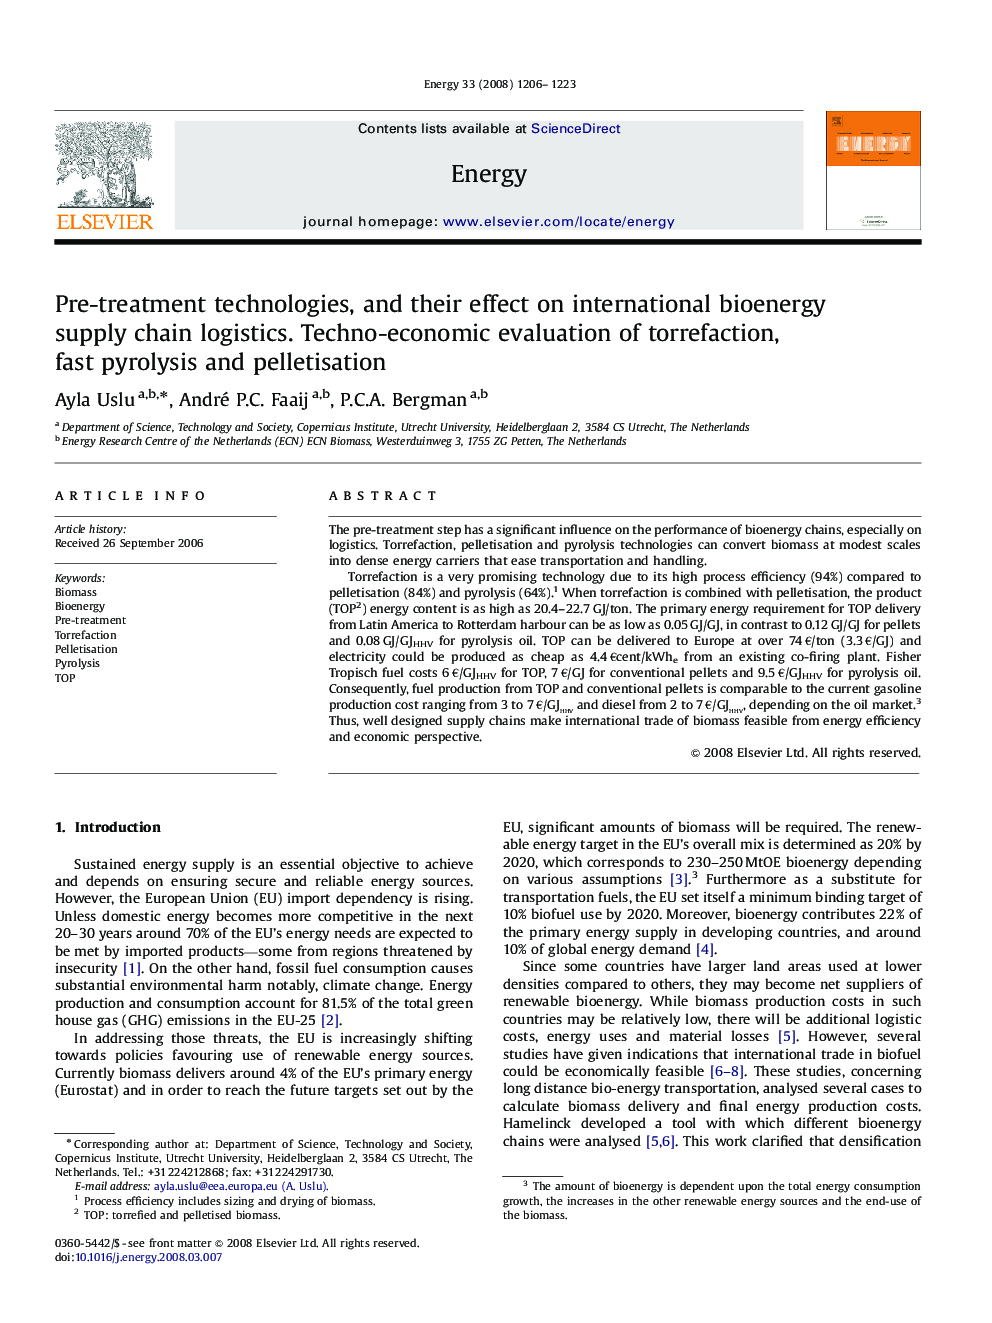 Pre-treatment technologies, and their effect on international bioenergy supply chain logistics. Techno-economic evaluation of torrefaction, fast pyrolysis and pelletisation